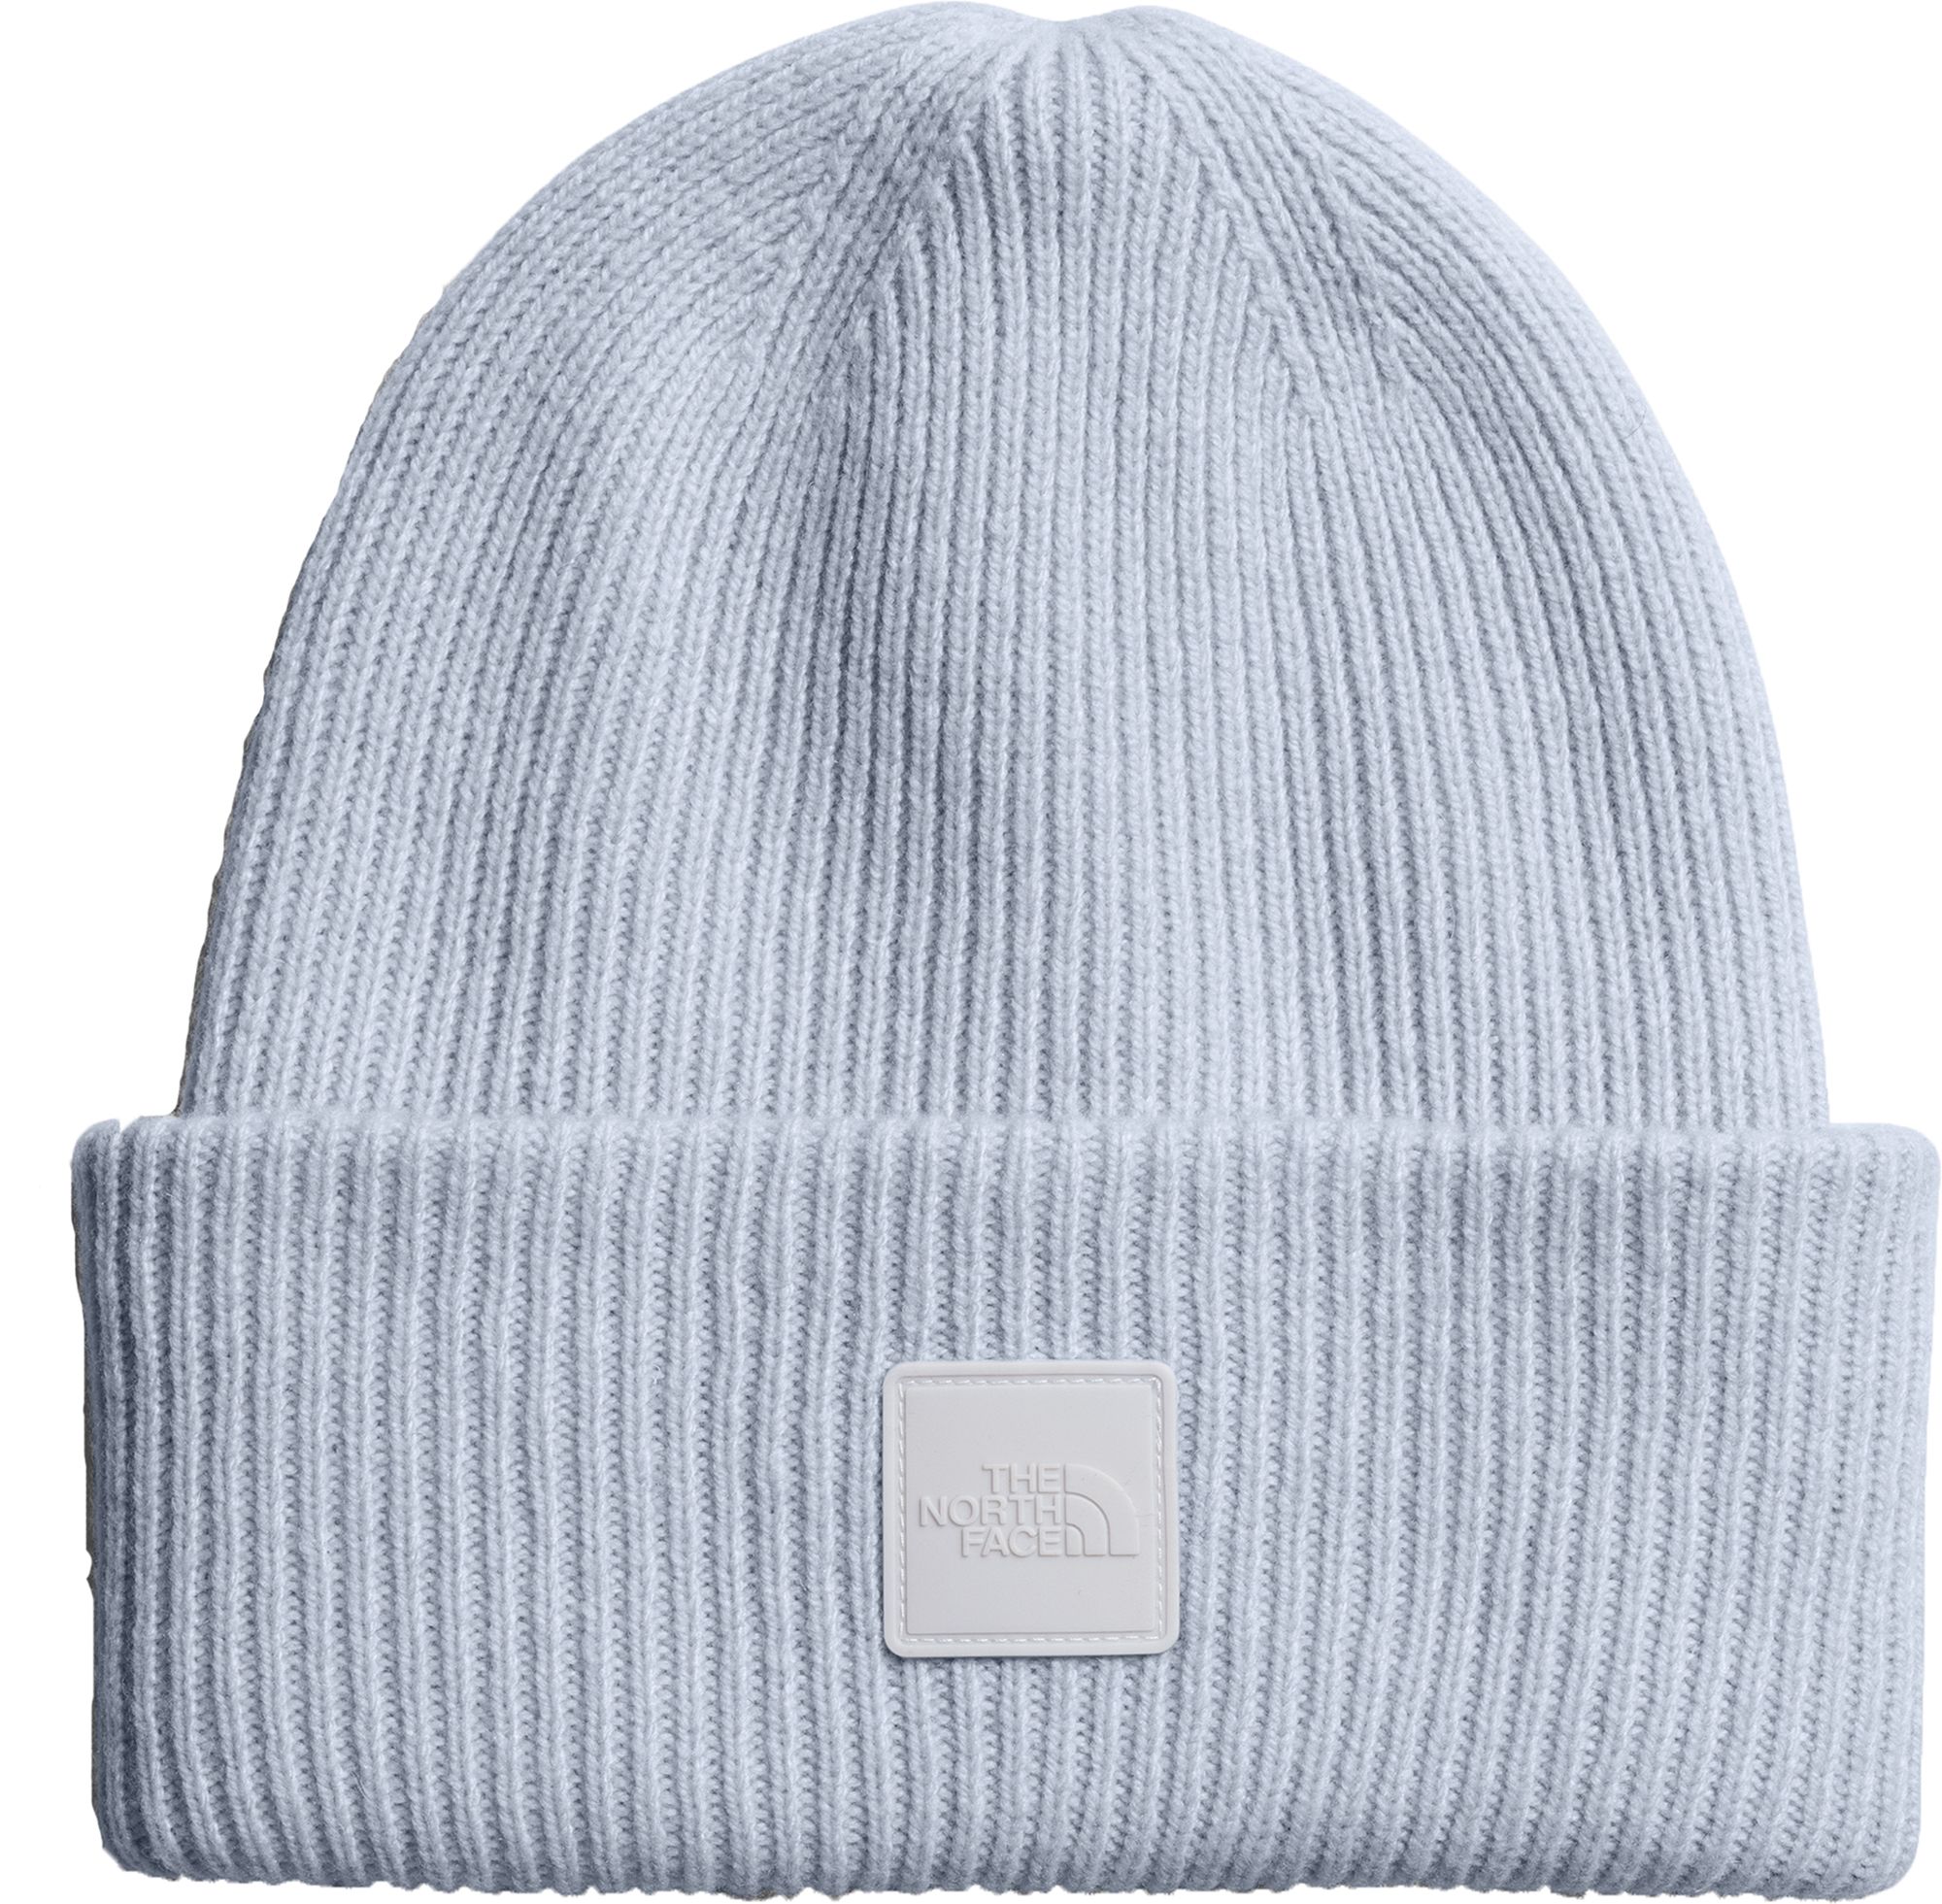 The North Face Womens Urban Patch Beanie